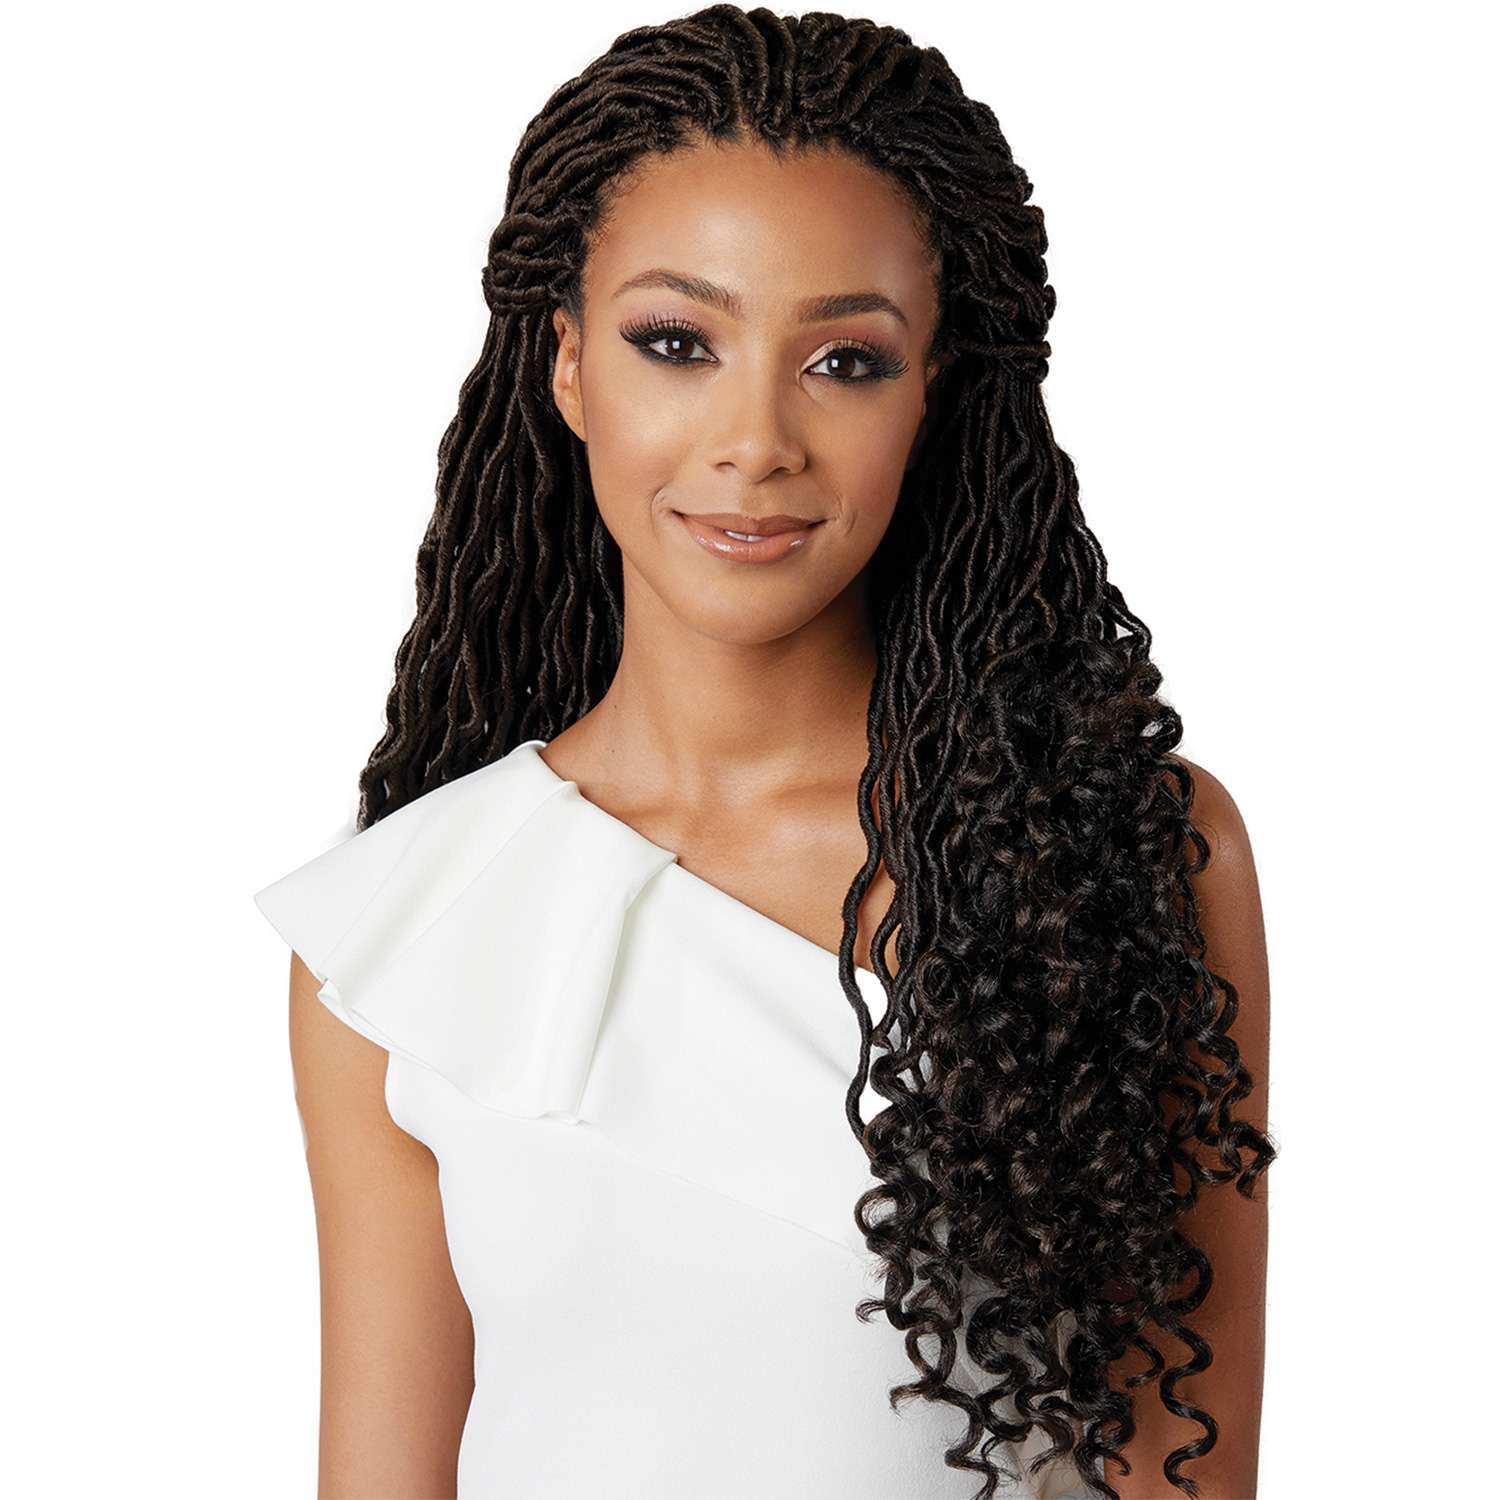 Hair twists with curly ends